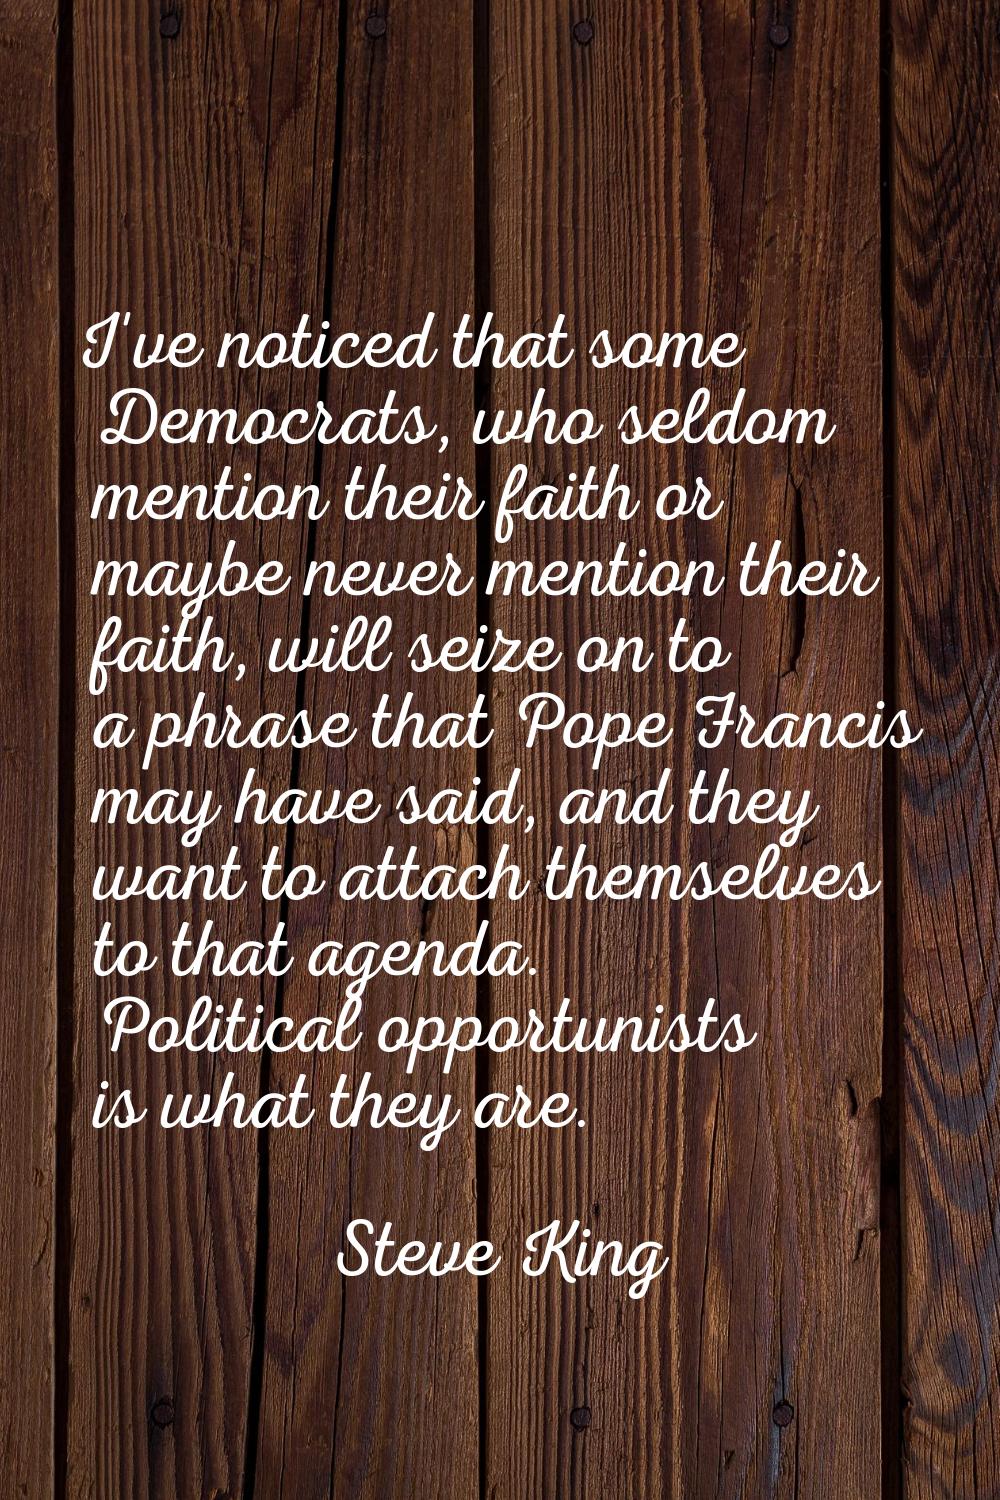 I've noticed that some Democrats, who seldom mention their faith or maybe never mention their faith